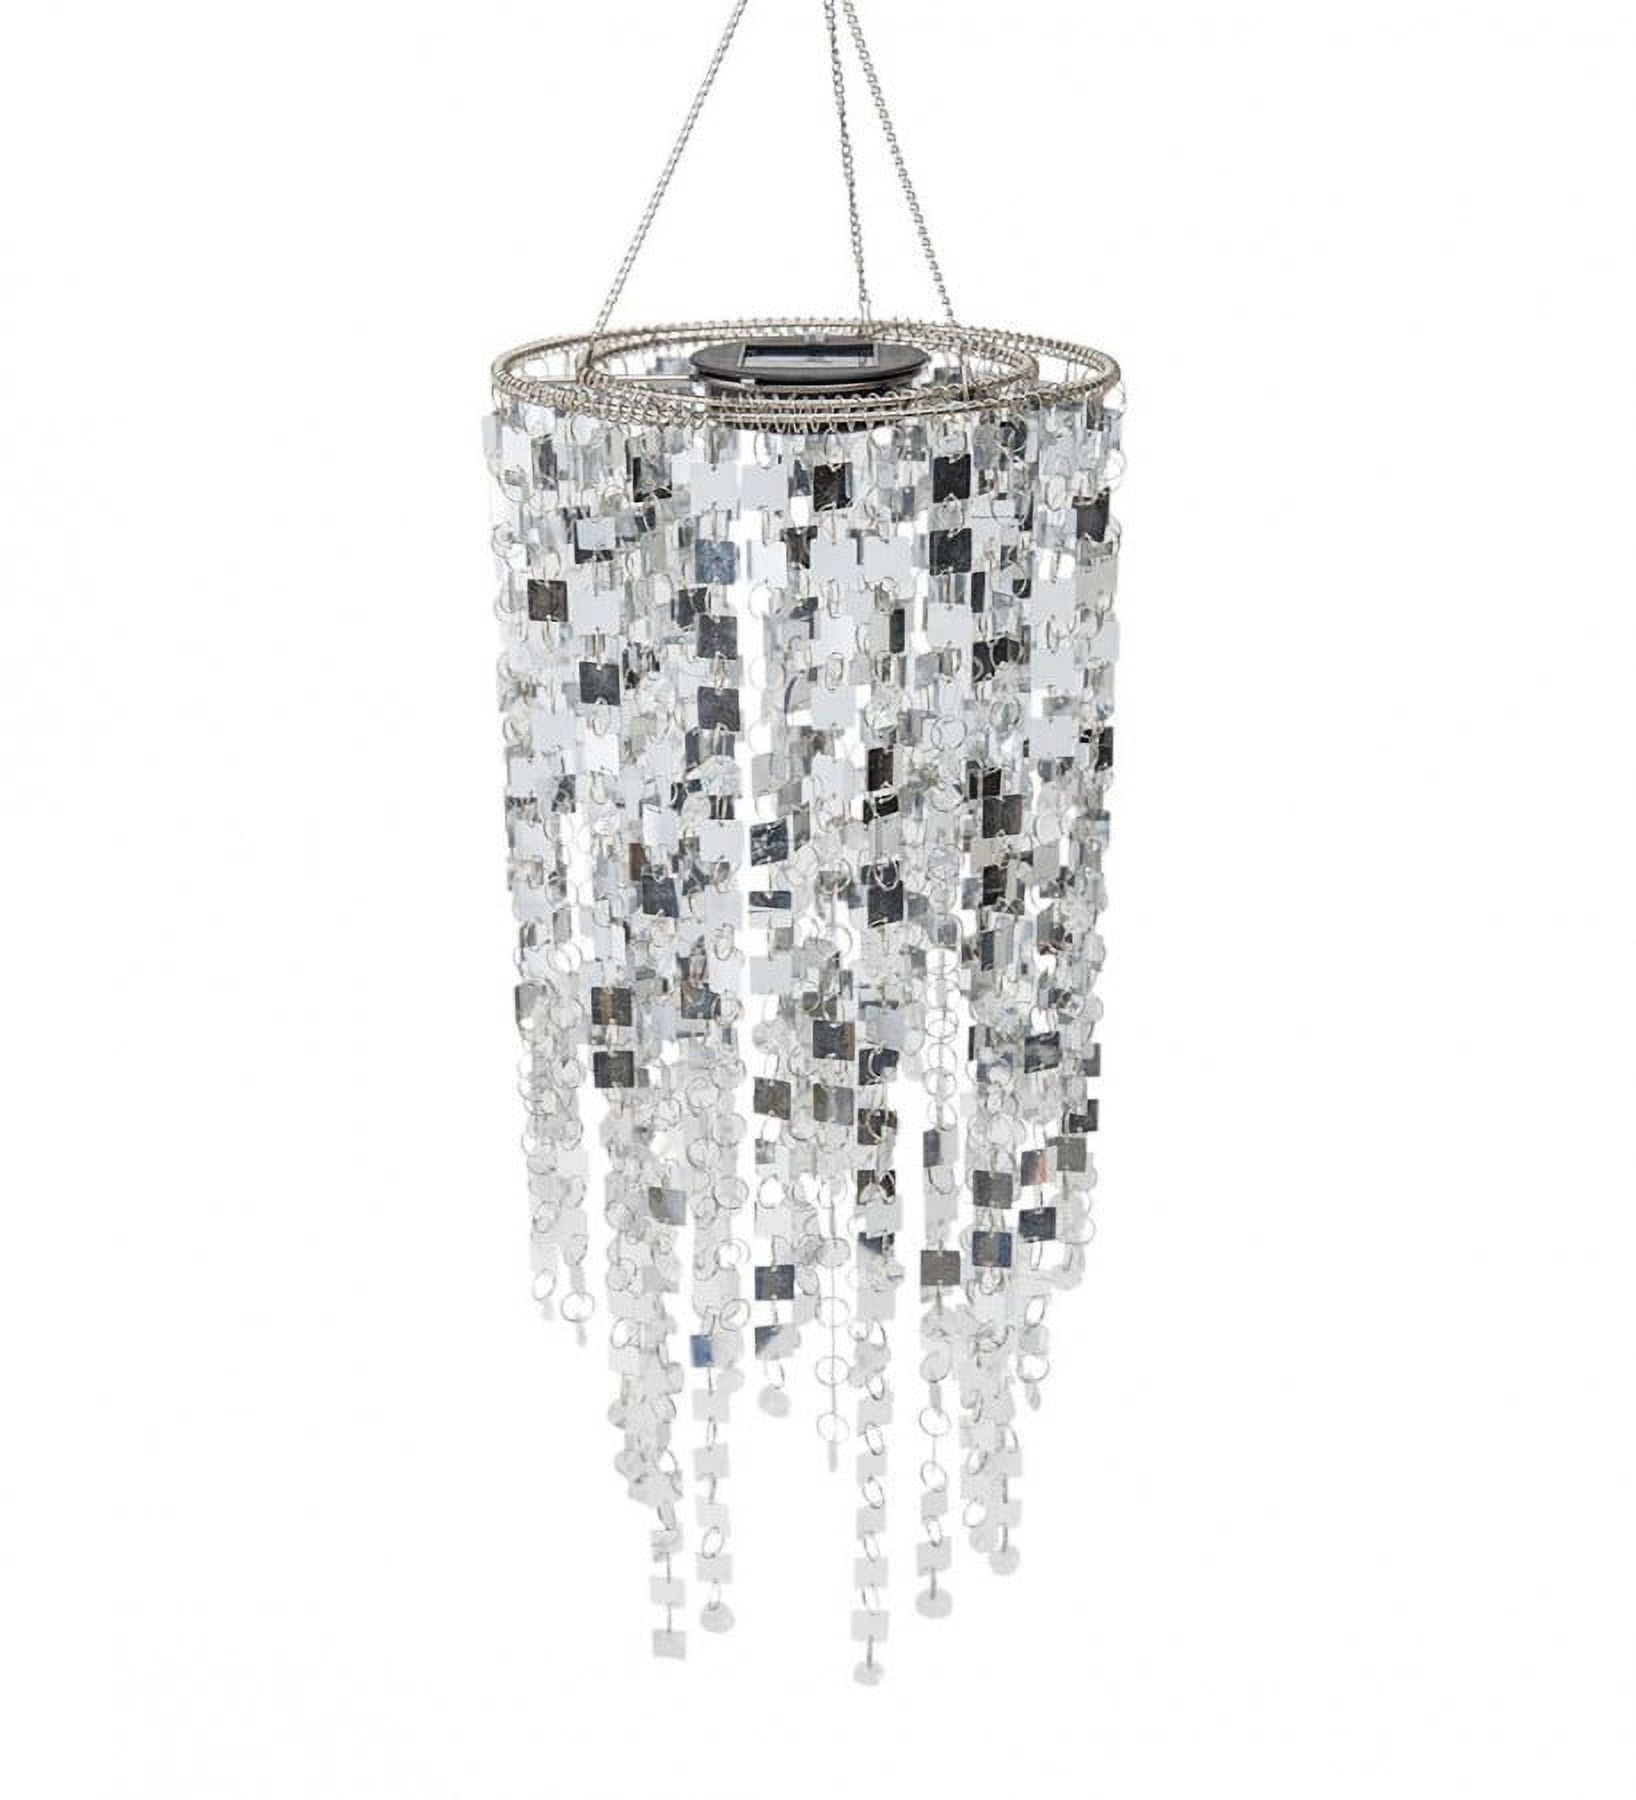 Wind & Weather Silver Mirrored Outdoor Chandelier with Solar Lights - image 1 of 3